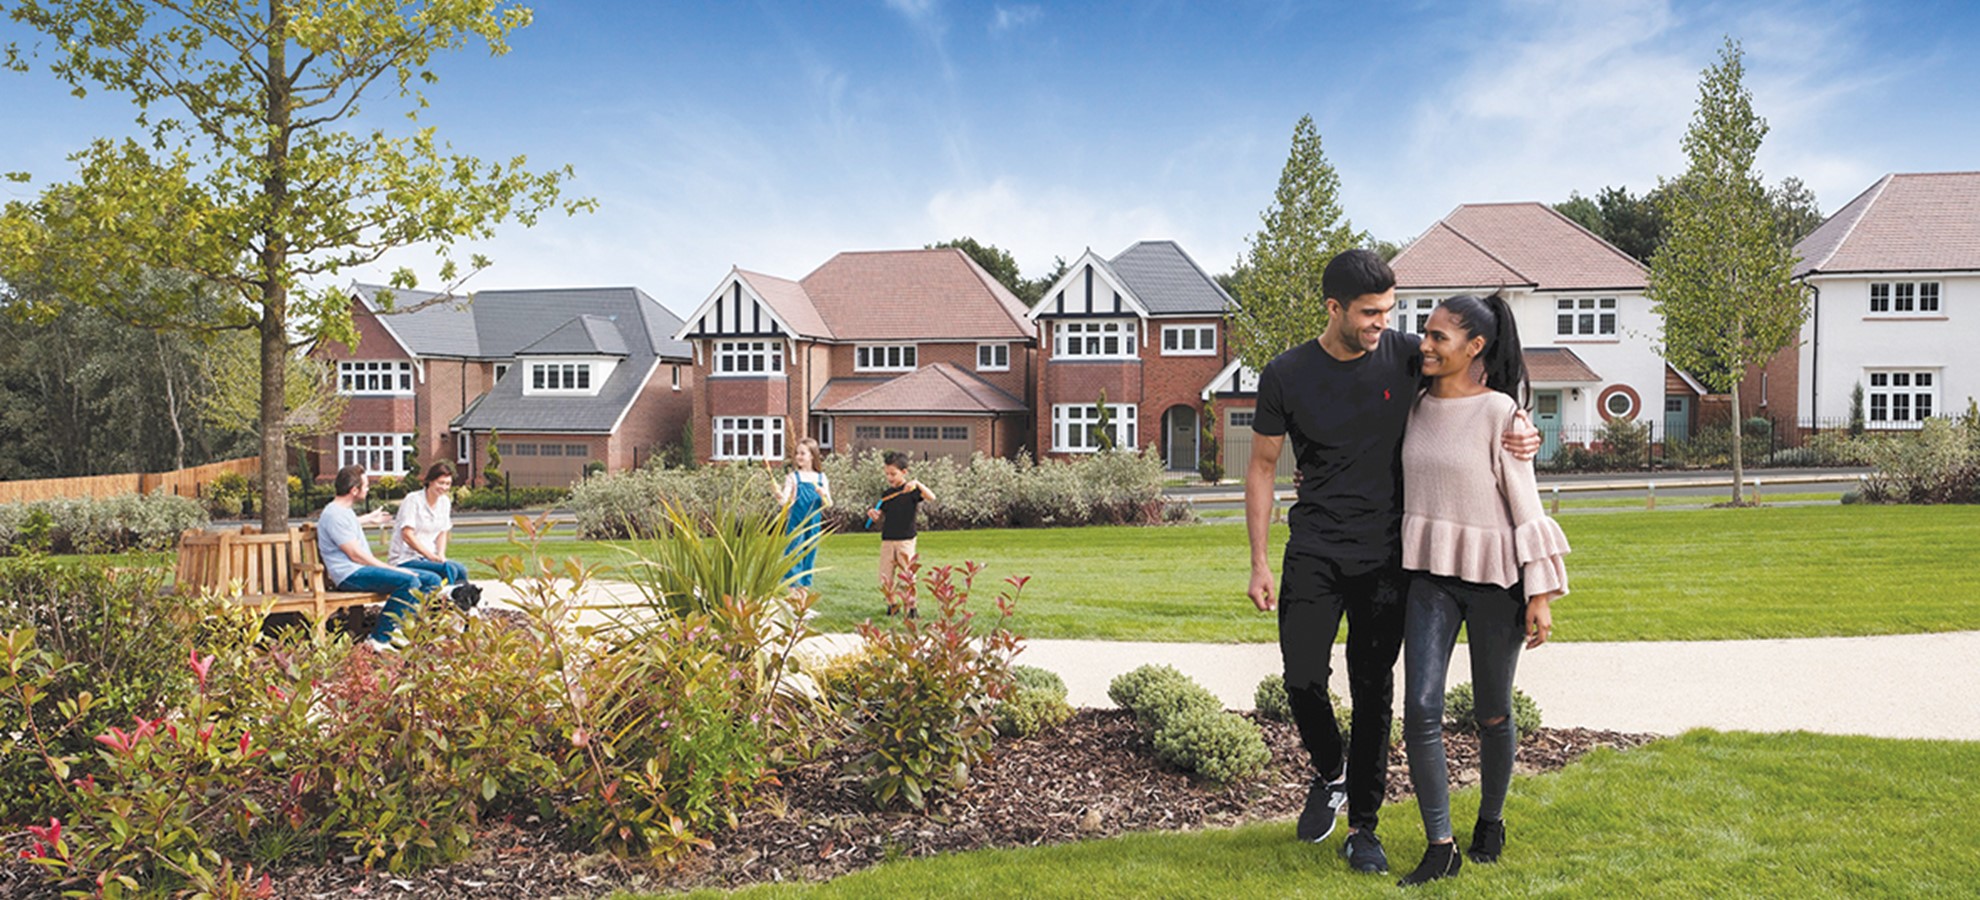 Redrow at Houlton | Rugby